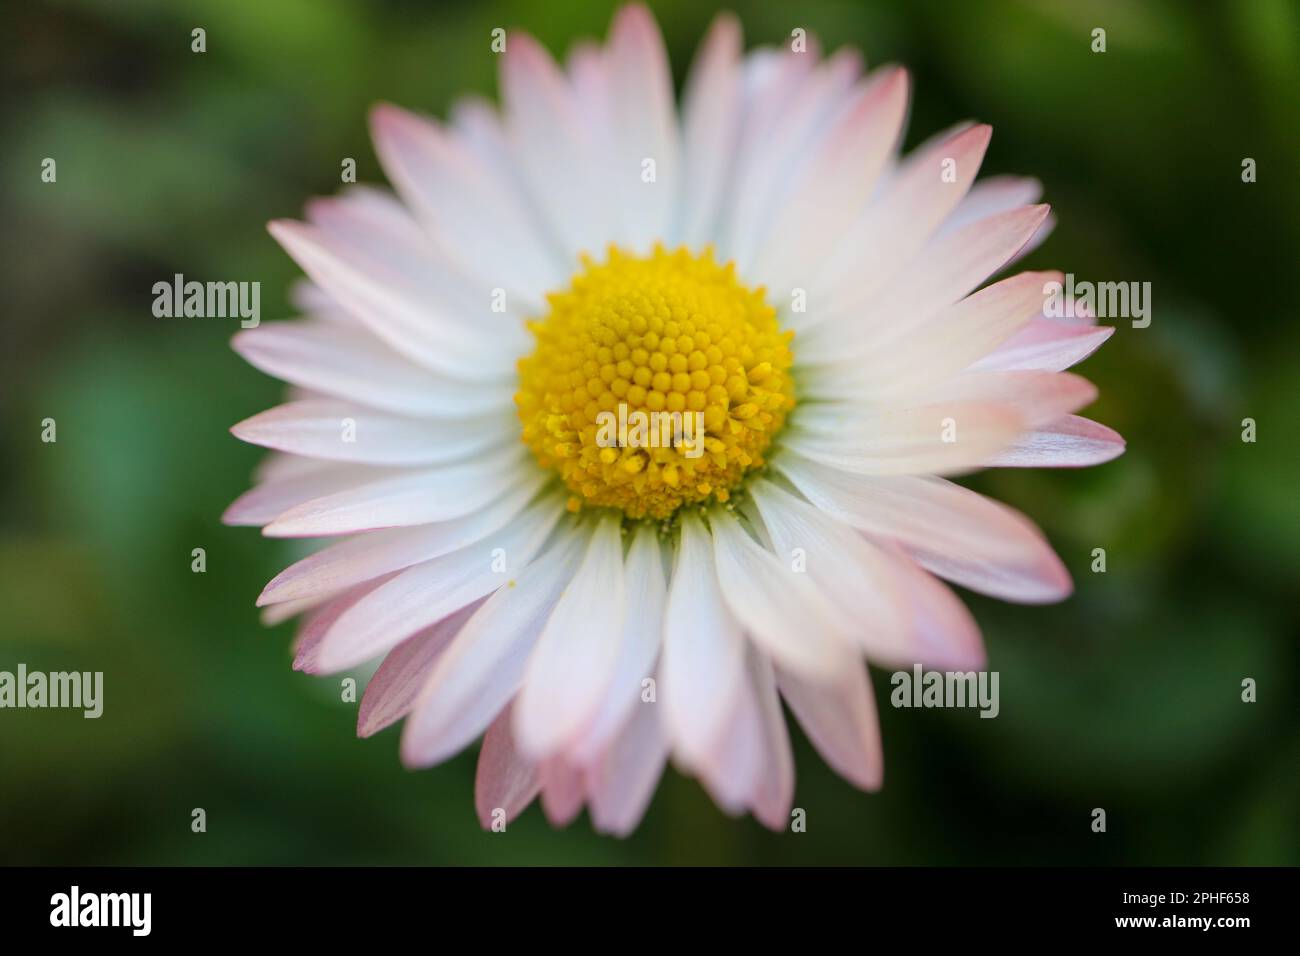 White common daisy with  yellow stamens  and green leaves,  spring daisy with delicate petals in the garden, flower head macro, beauty in nature Stock Photo